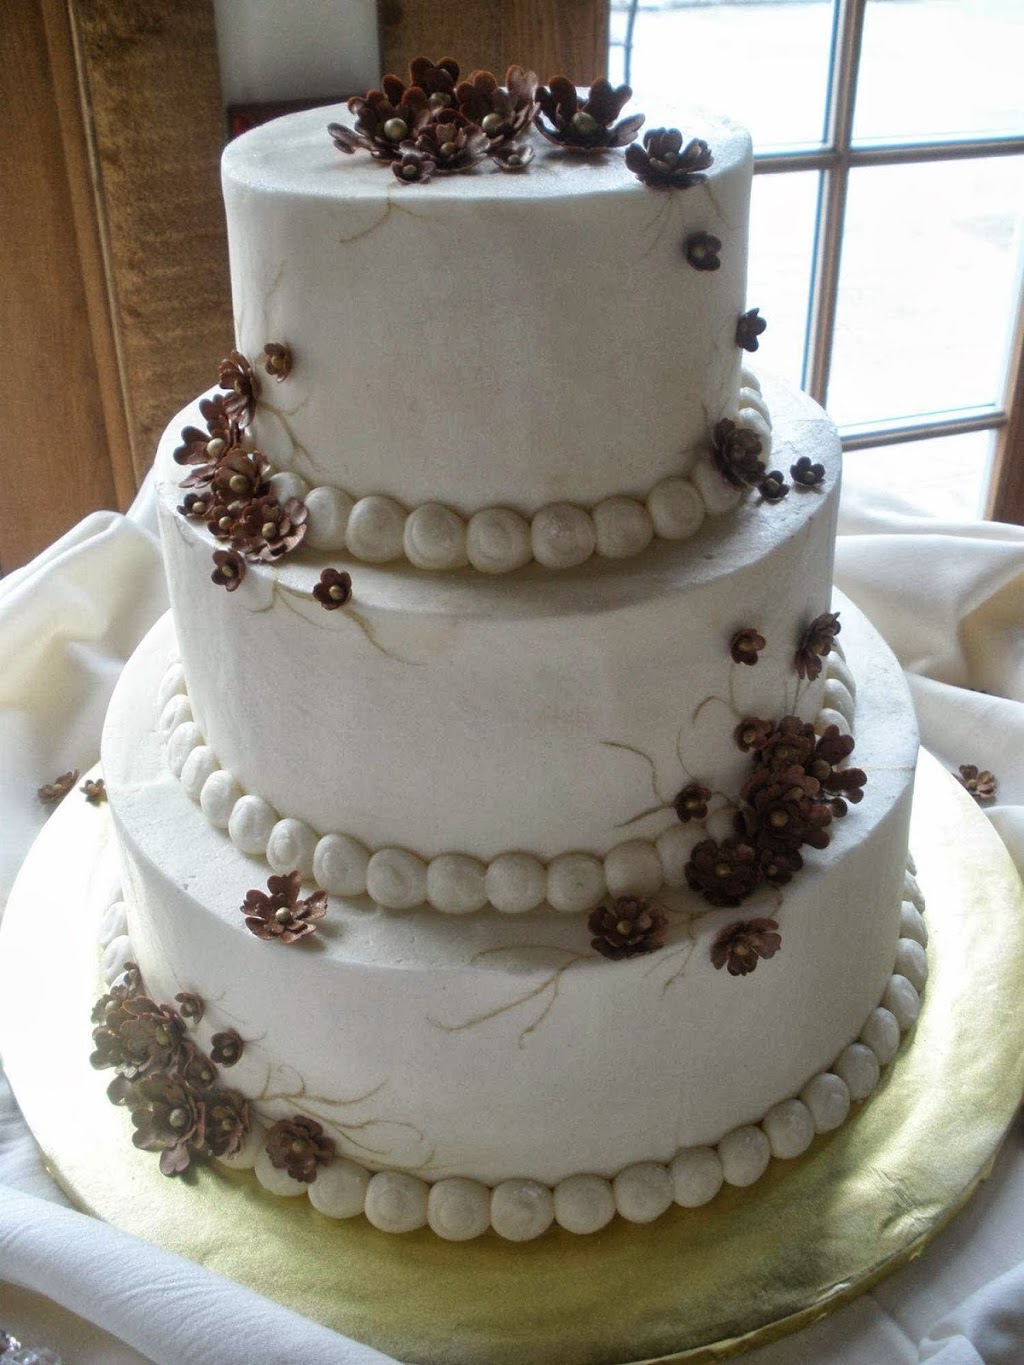 Amys Creative Cakes | 2045 Valley View Dr, Quakertown, PA 18951 | Phone: (215) 529-5763